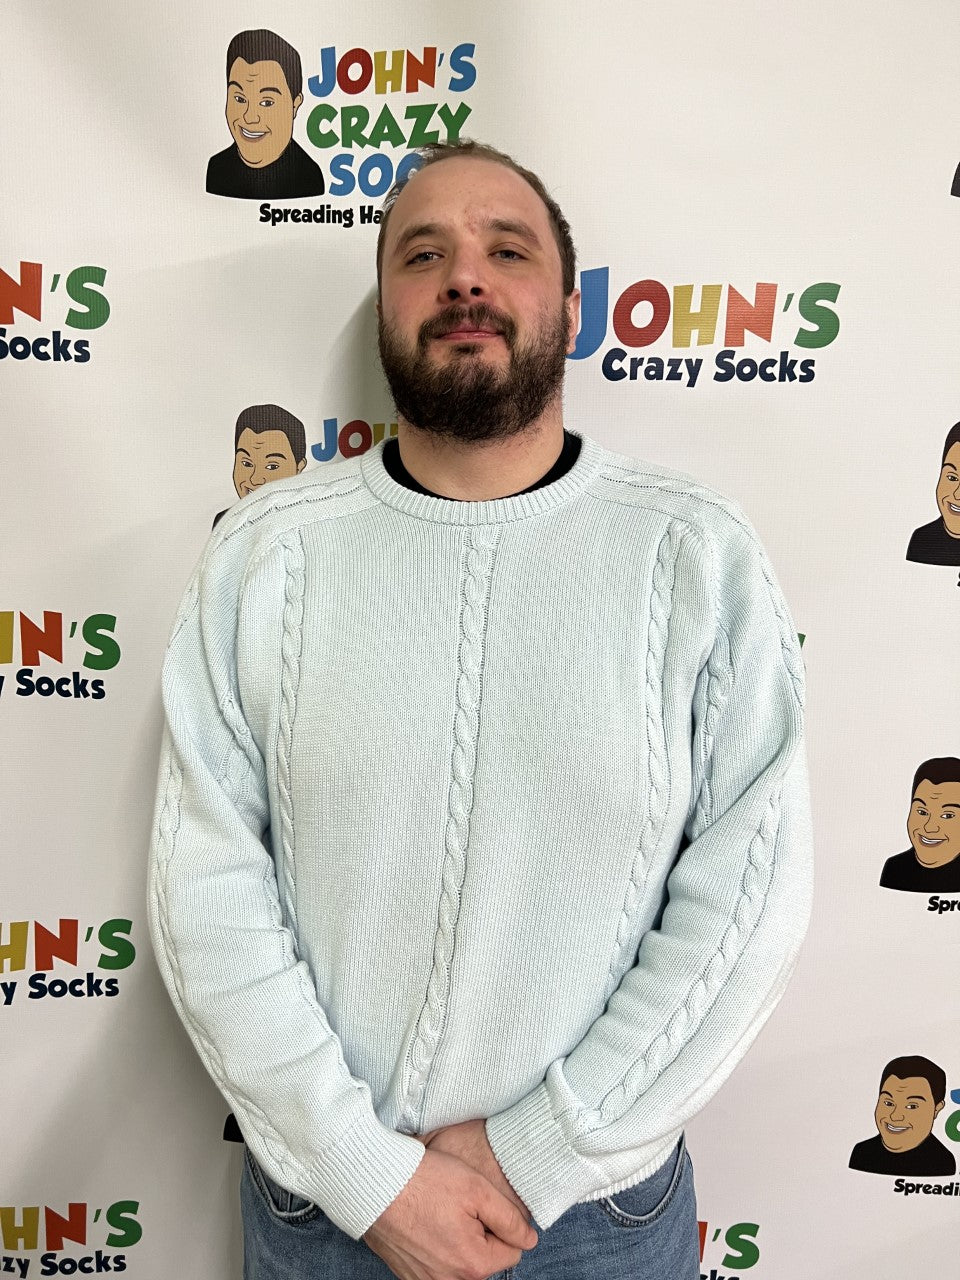 Andrew Neter of John’s Crazy Socks Named a Long Island Young Professional 30 under 30